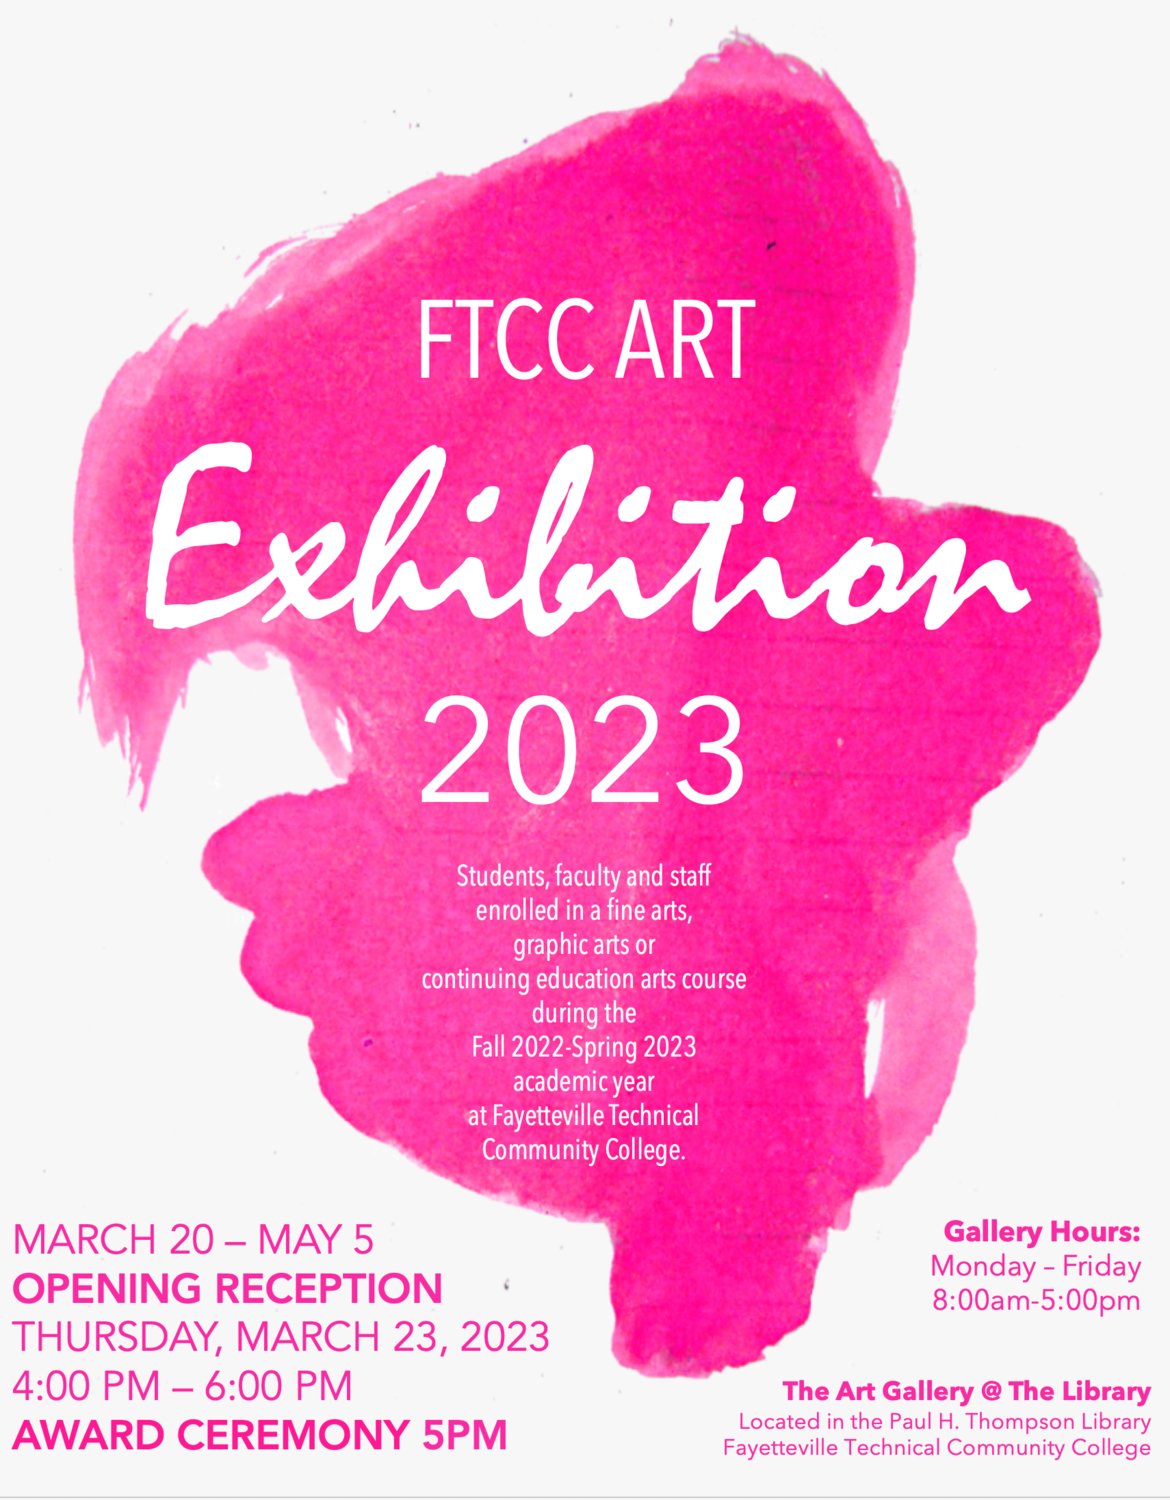 The Art Gallery @ the Library at Fayetteville Technical Community College will host "FTCC Art Exhibition: 2023" through May 5.